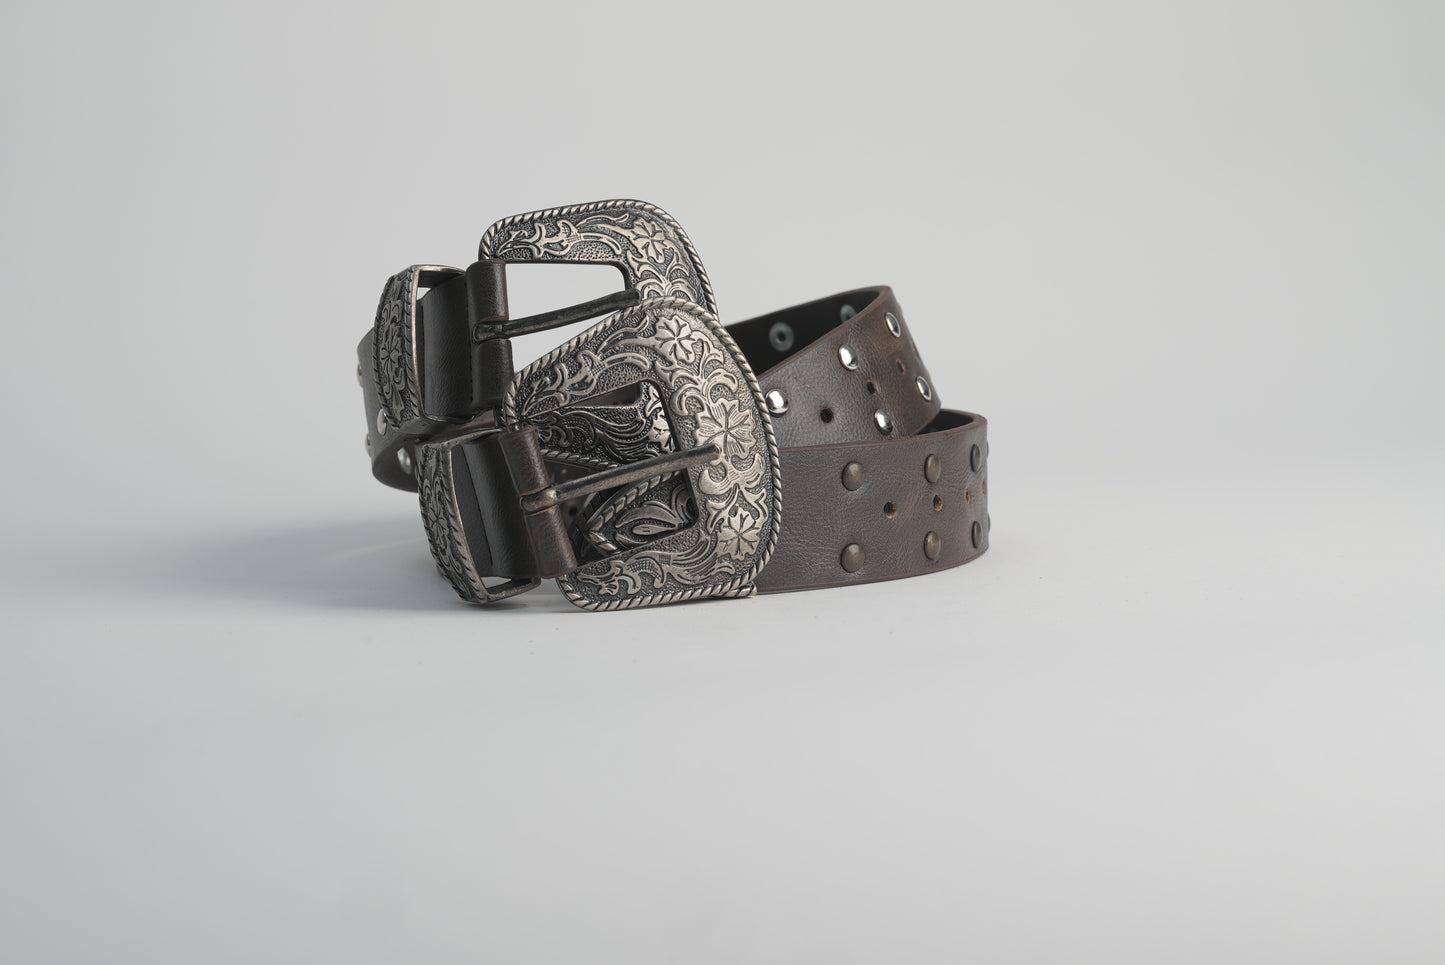 Boot Belt con remaches